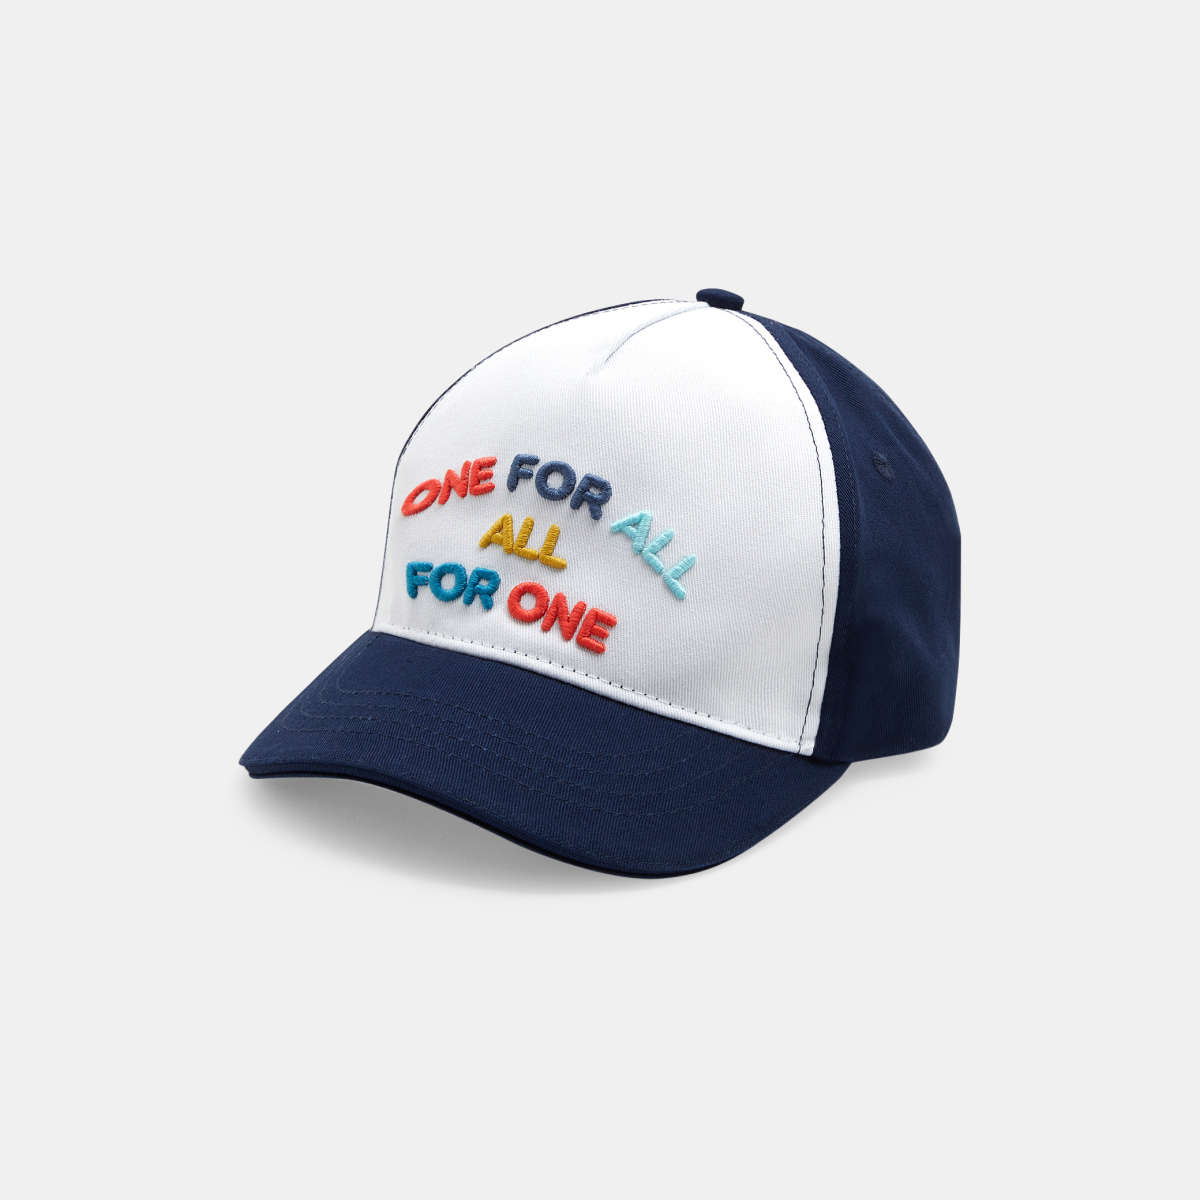 Casquette "One for all all for one"